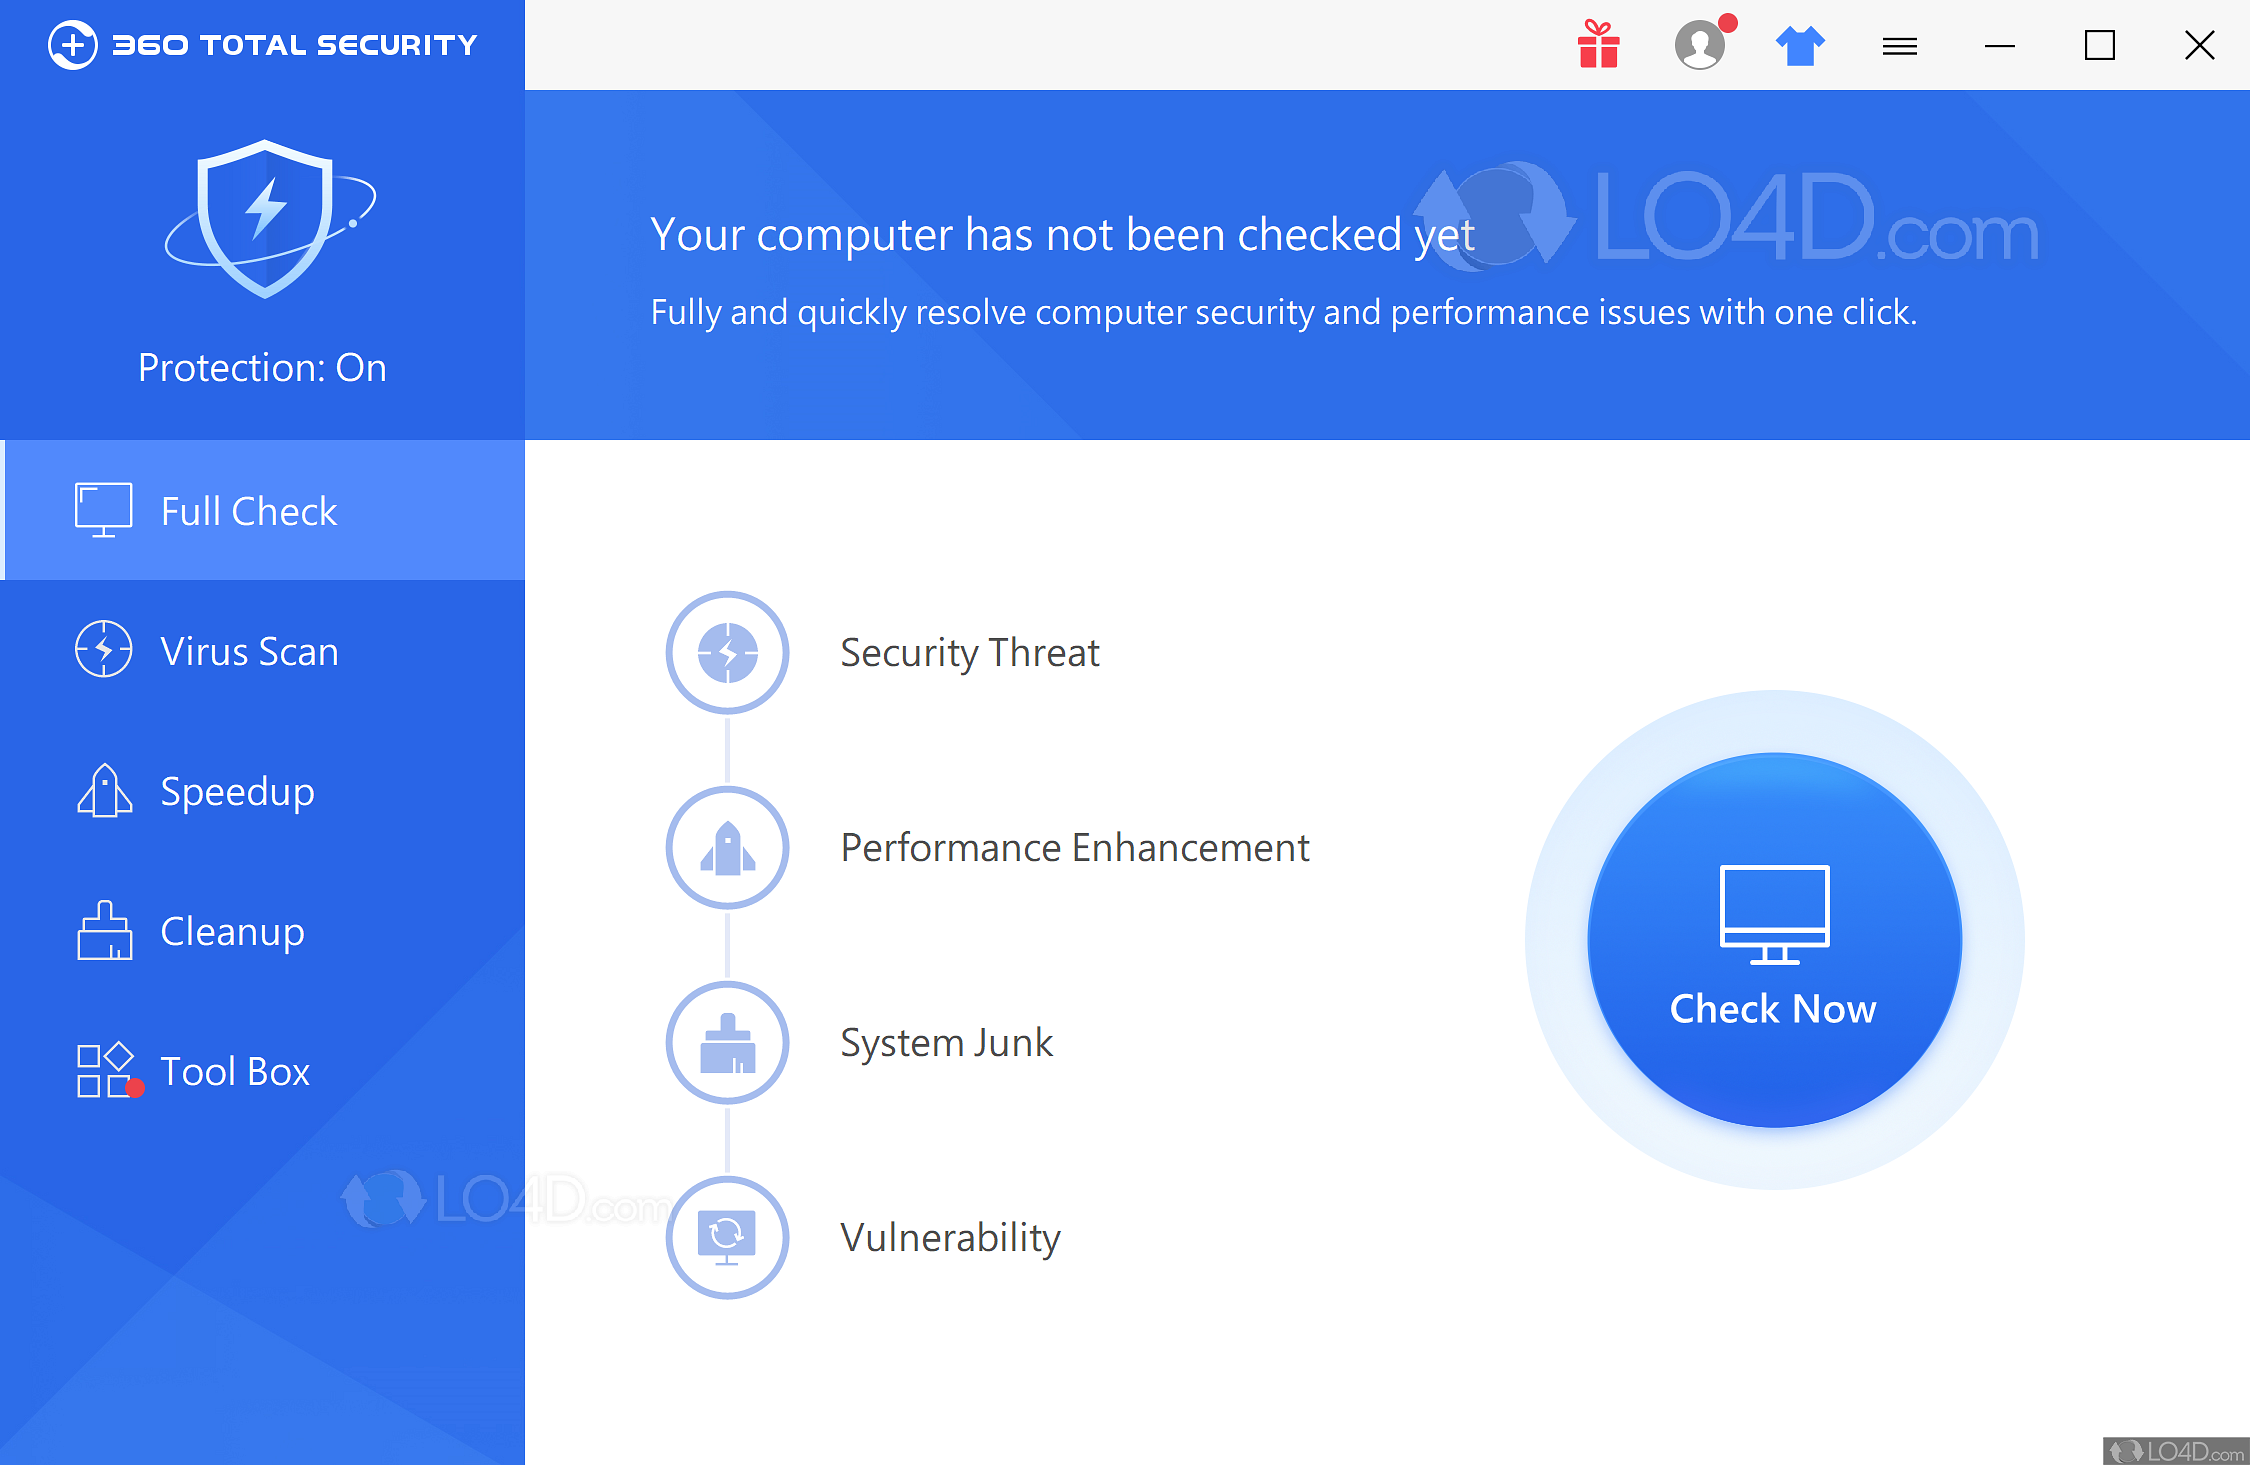 360 security free download for windows xp